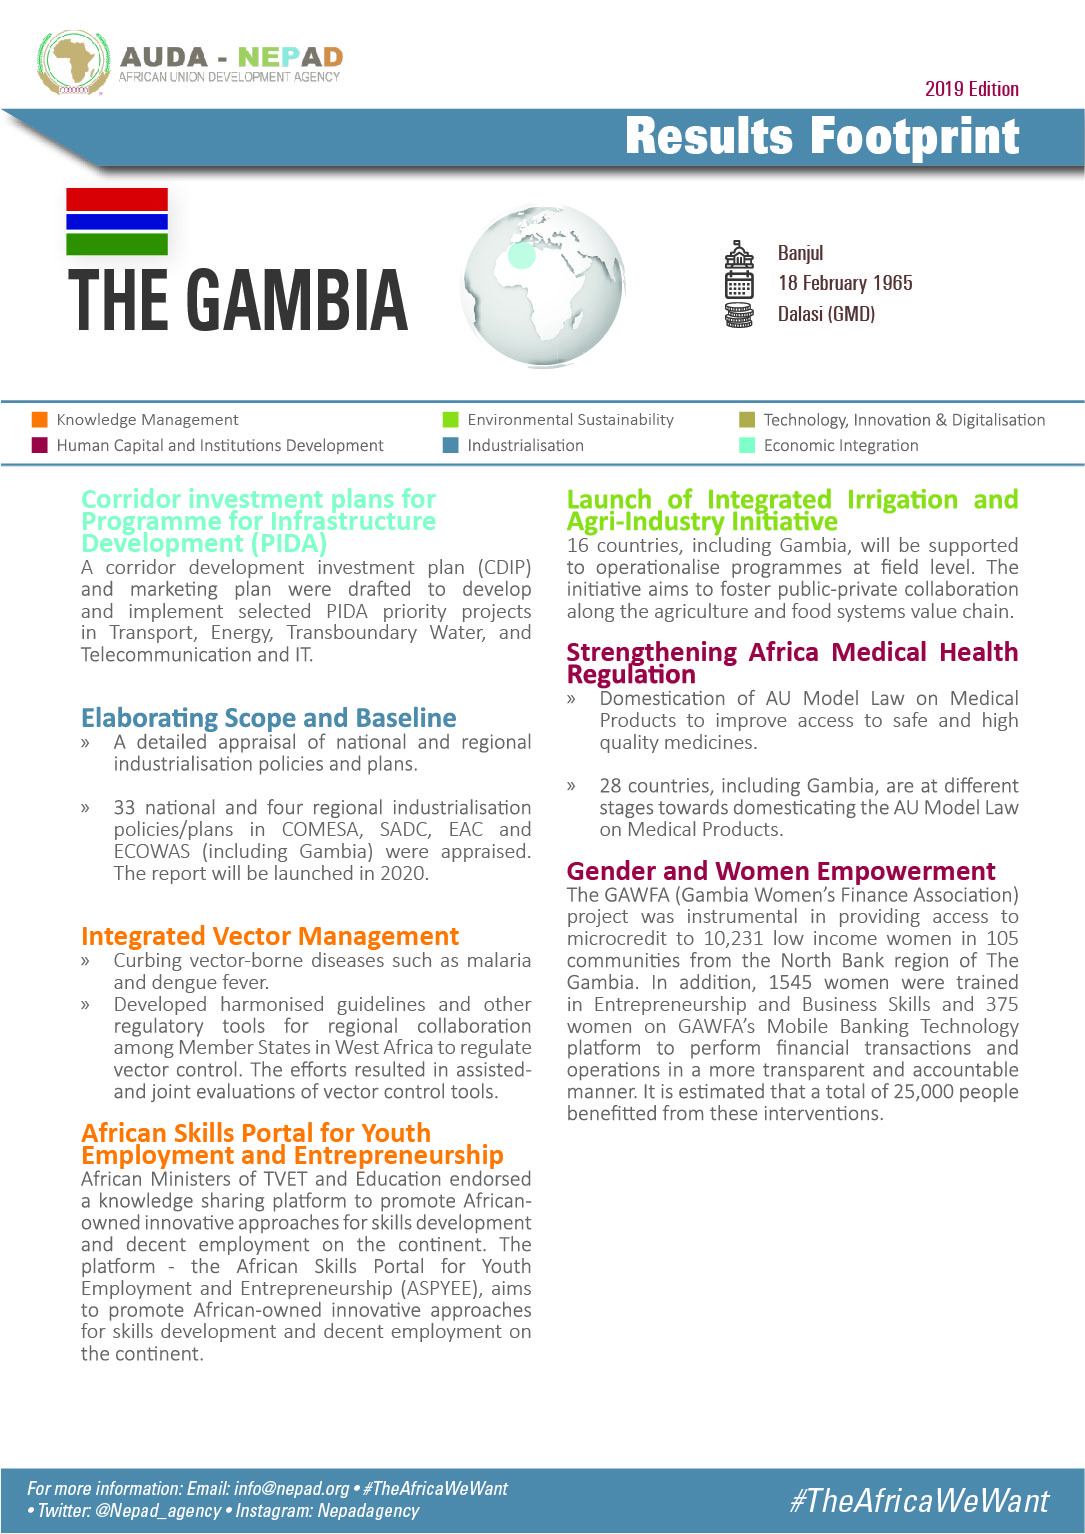 2019 AUDA-NEPAD Footprint: Country Profiles: The Gambia